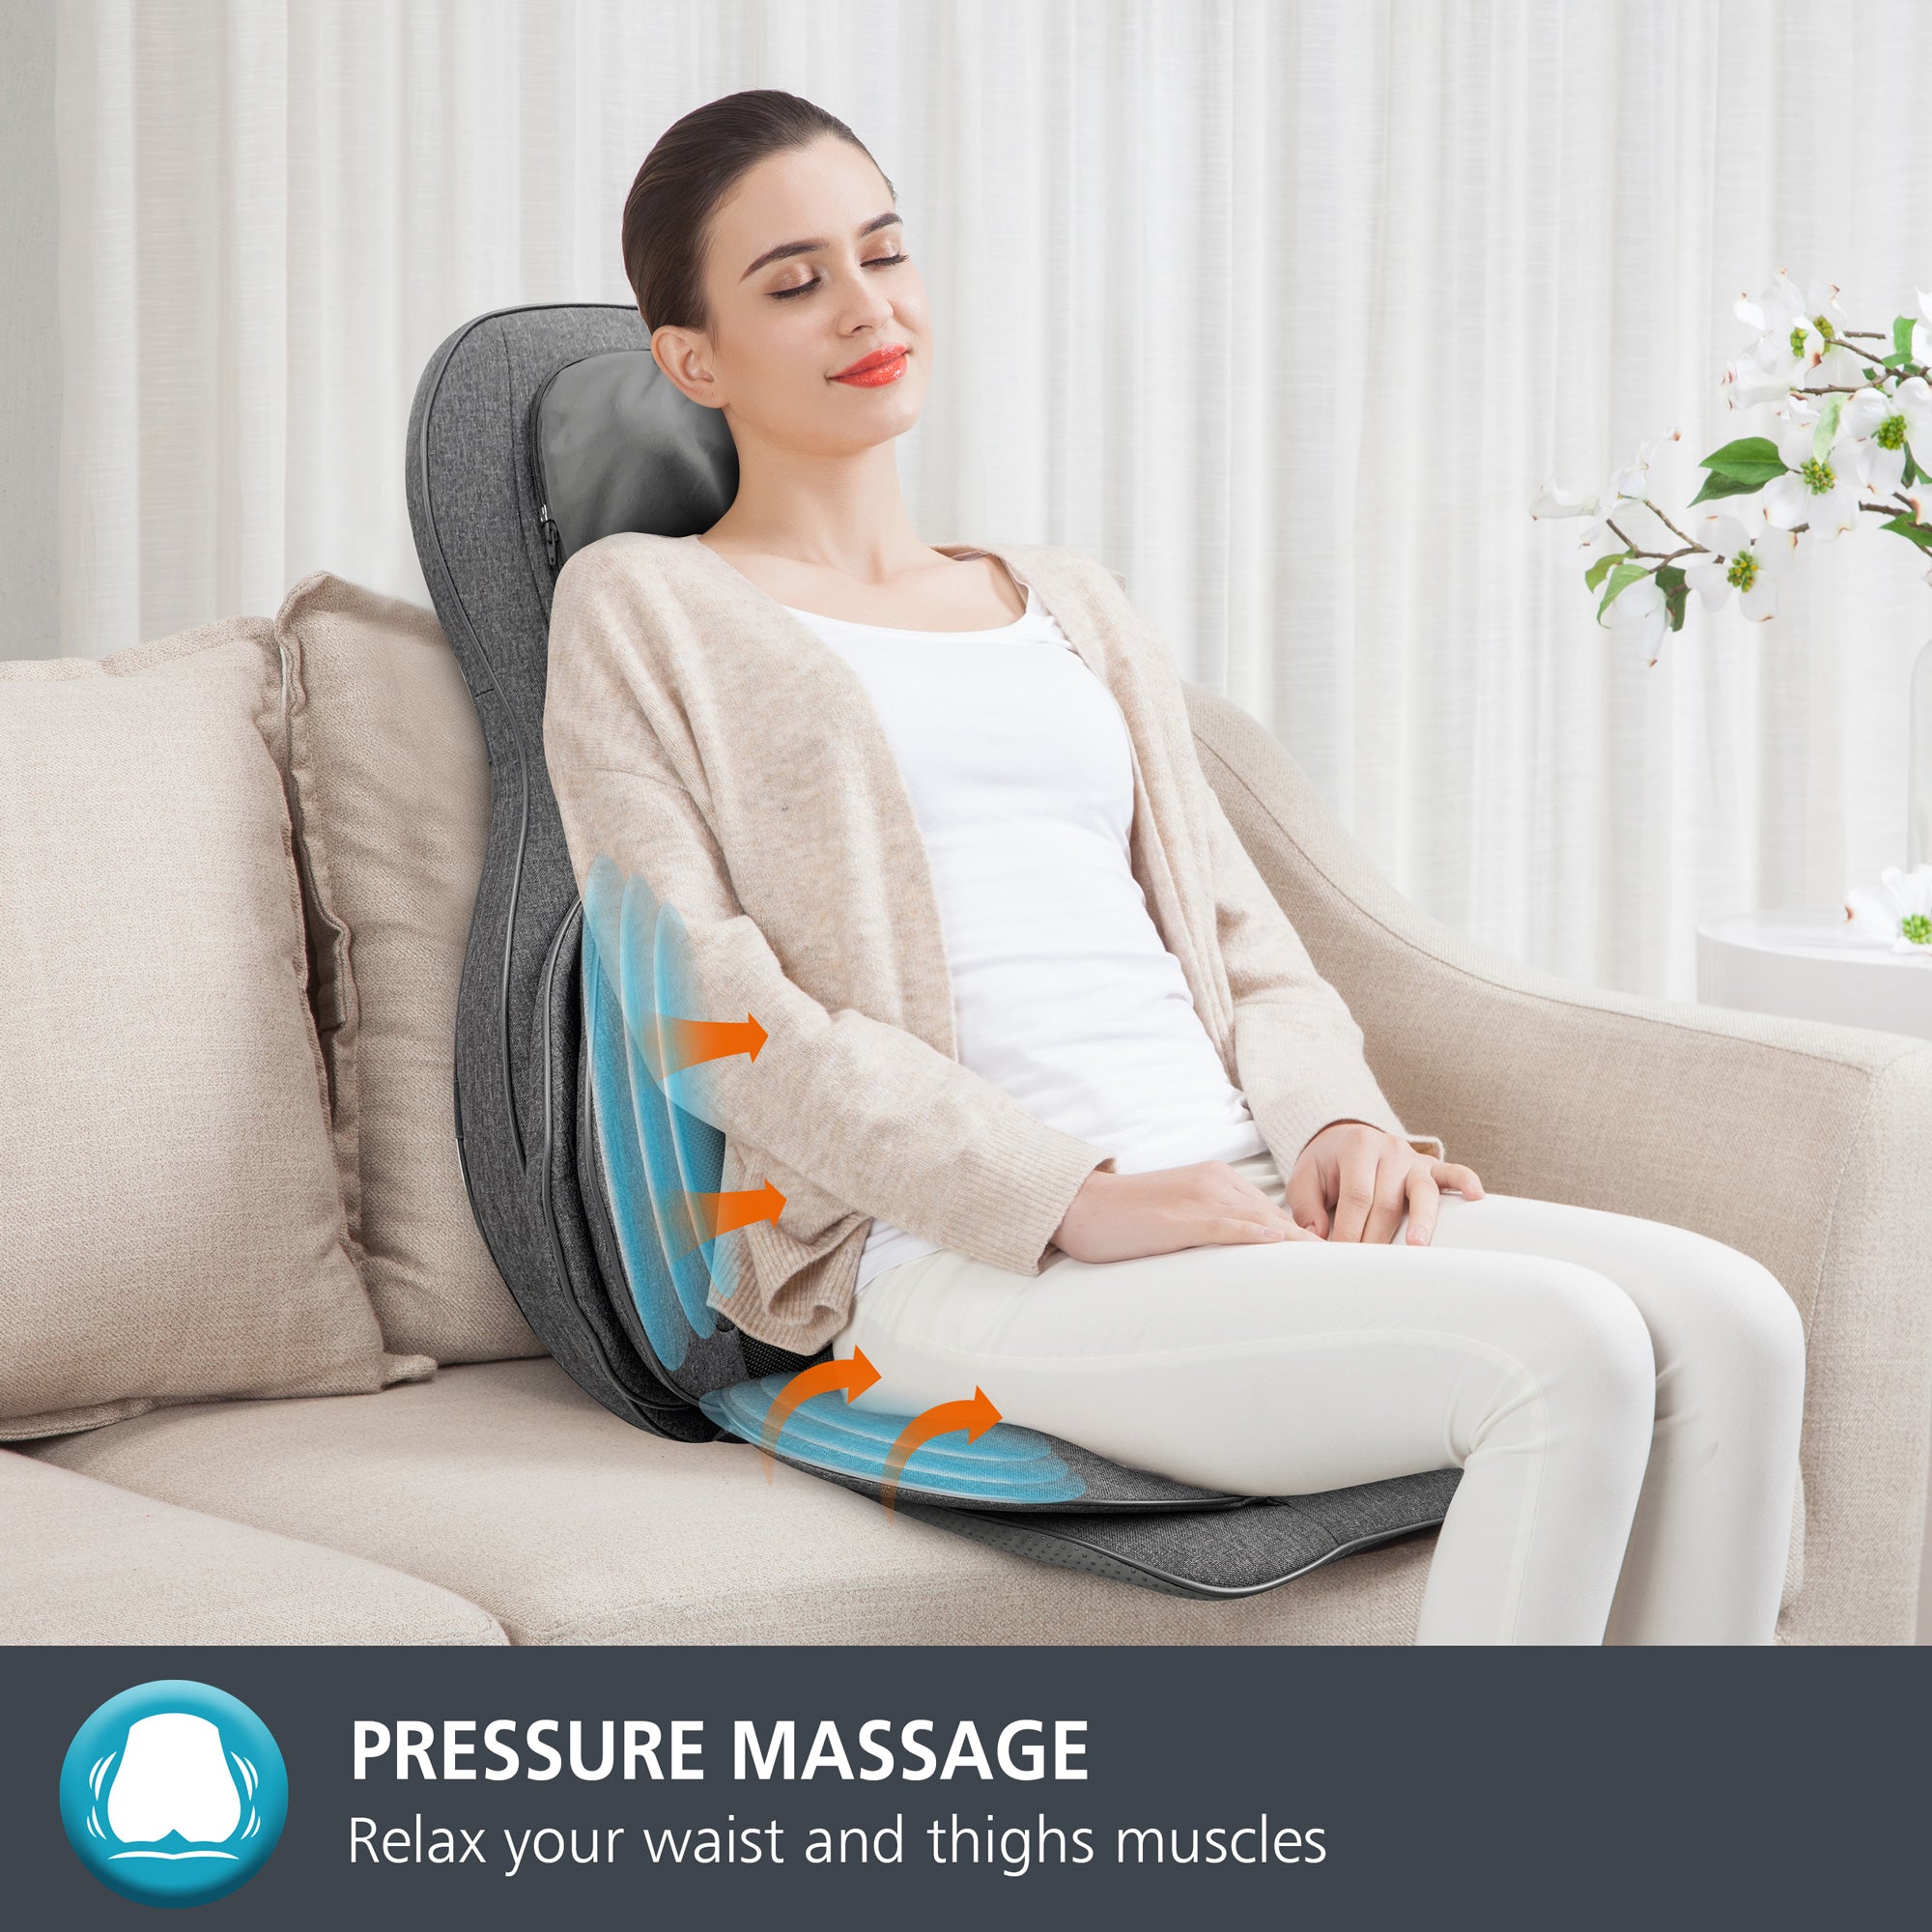  COMFIER Shiatsu Neck Back Massager with Heat, 2D ro 3D Kneading  Massage Chair Pad, Adjustable Compression Seat Massager : Health & Household